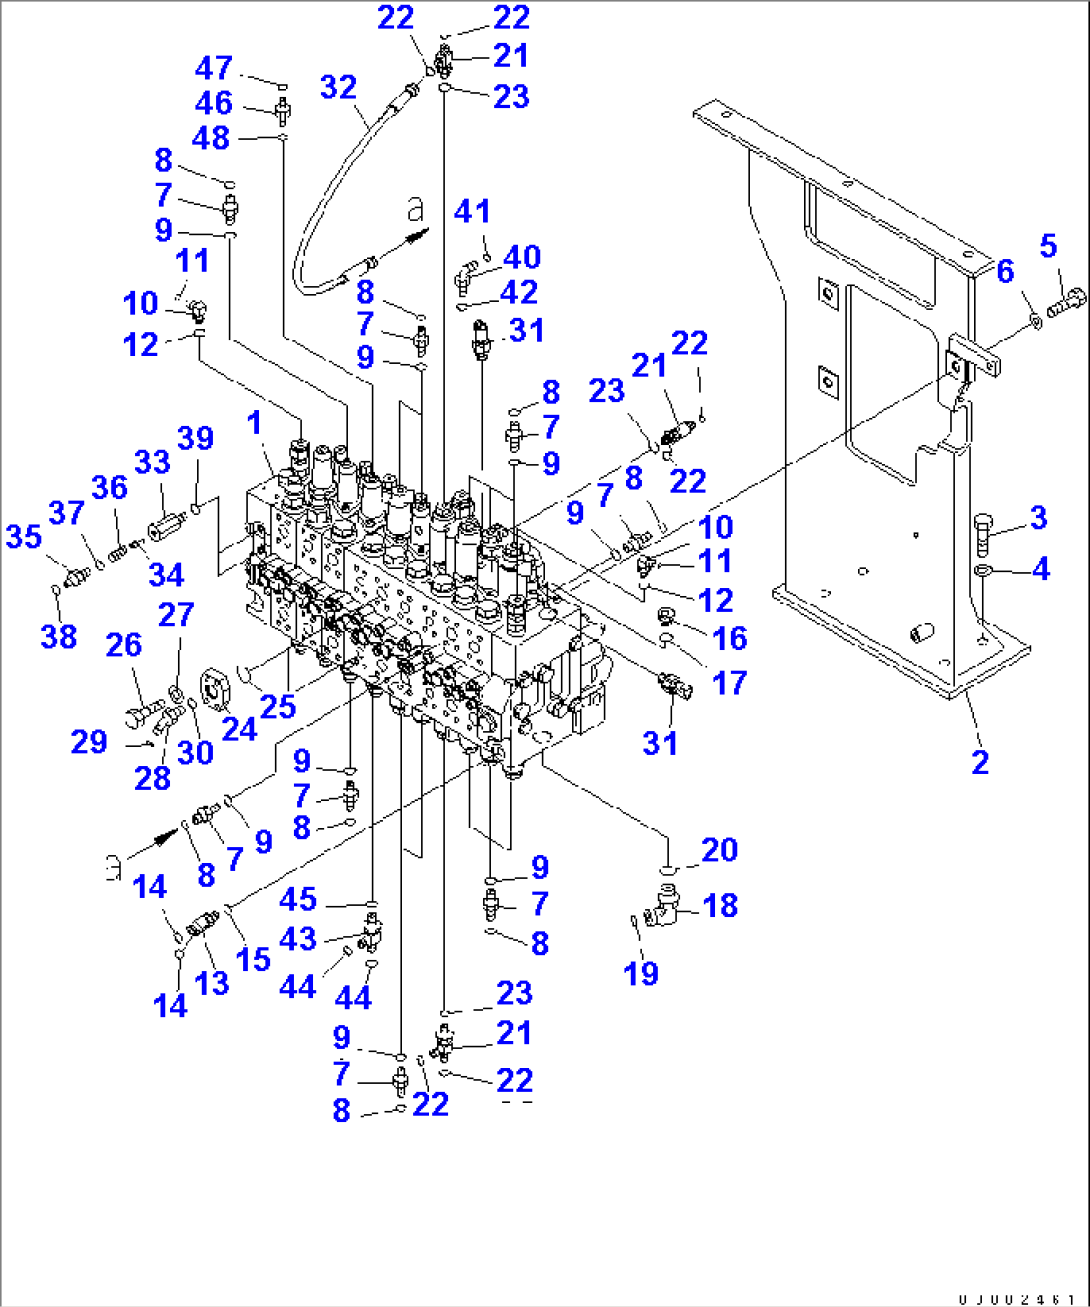 MAIN VALVE AND MOUNTING PARTS (FOR 2-PIECE BOOM WITH 2 ATT.)